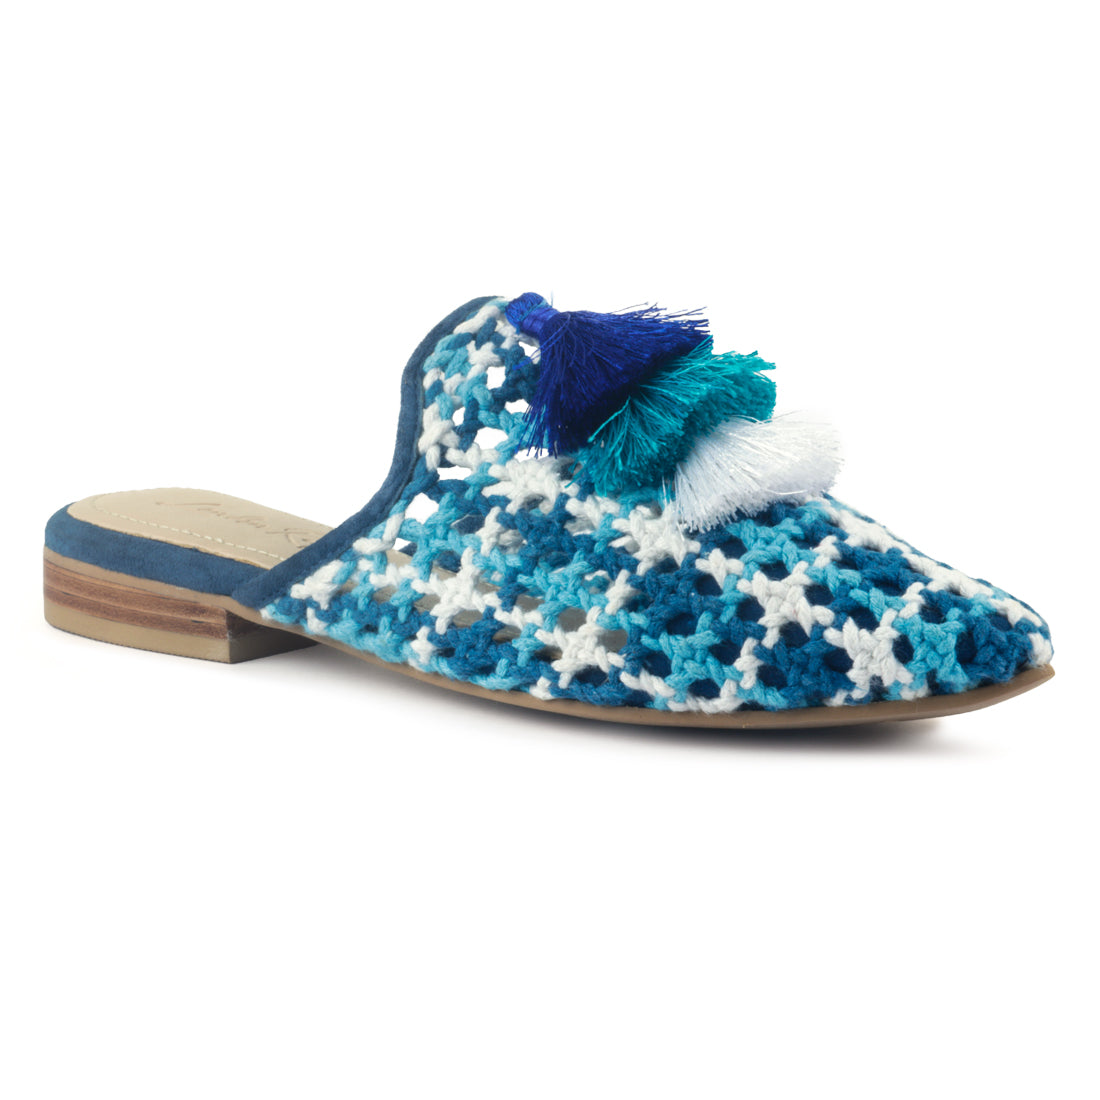 Blue Woven Flat Mules With Tassels - Blue